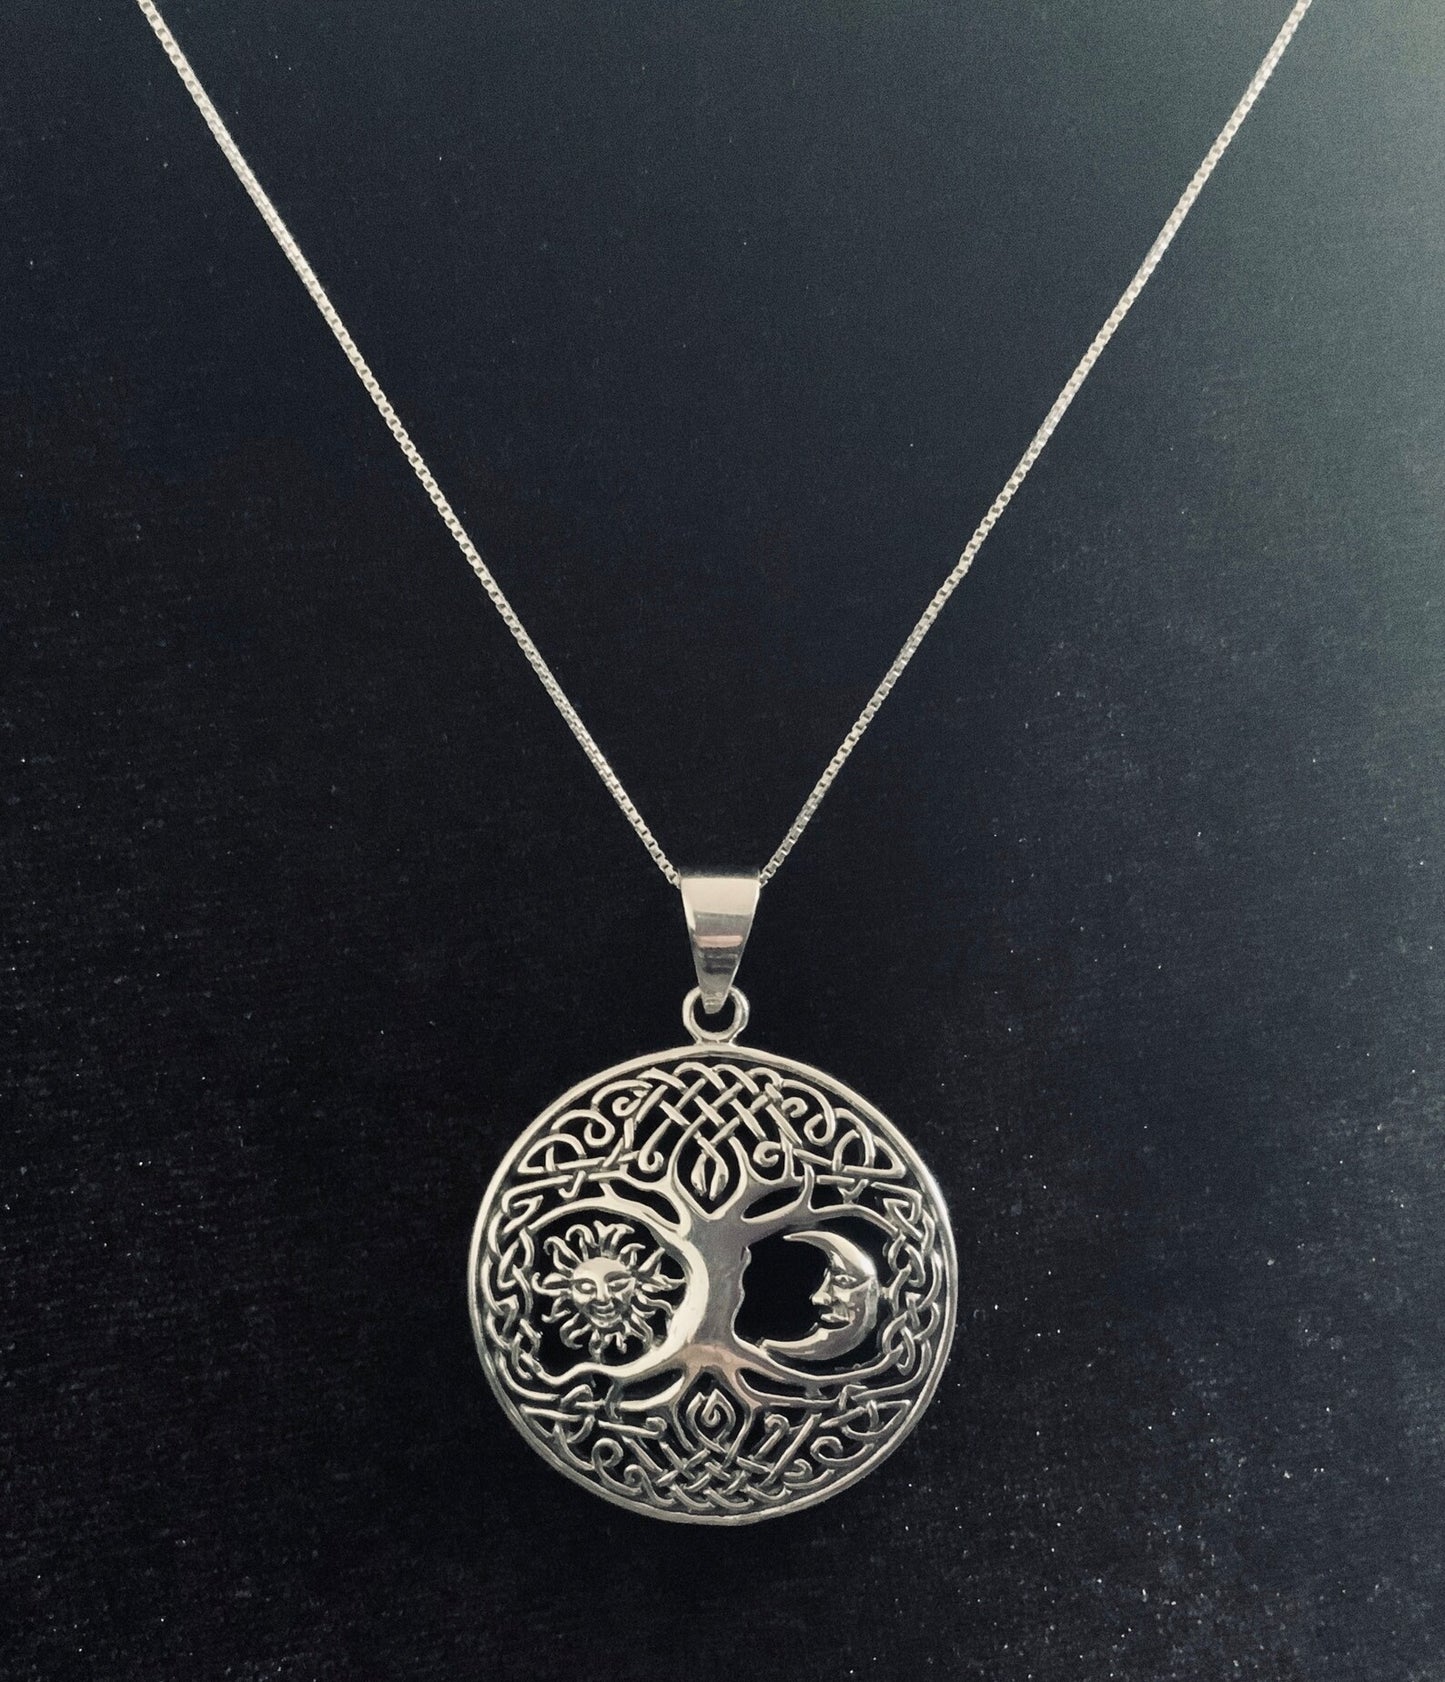 Handcast 925 Sterling Silver Tree of Life Sun Moon Necklace